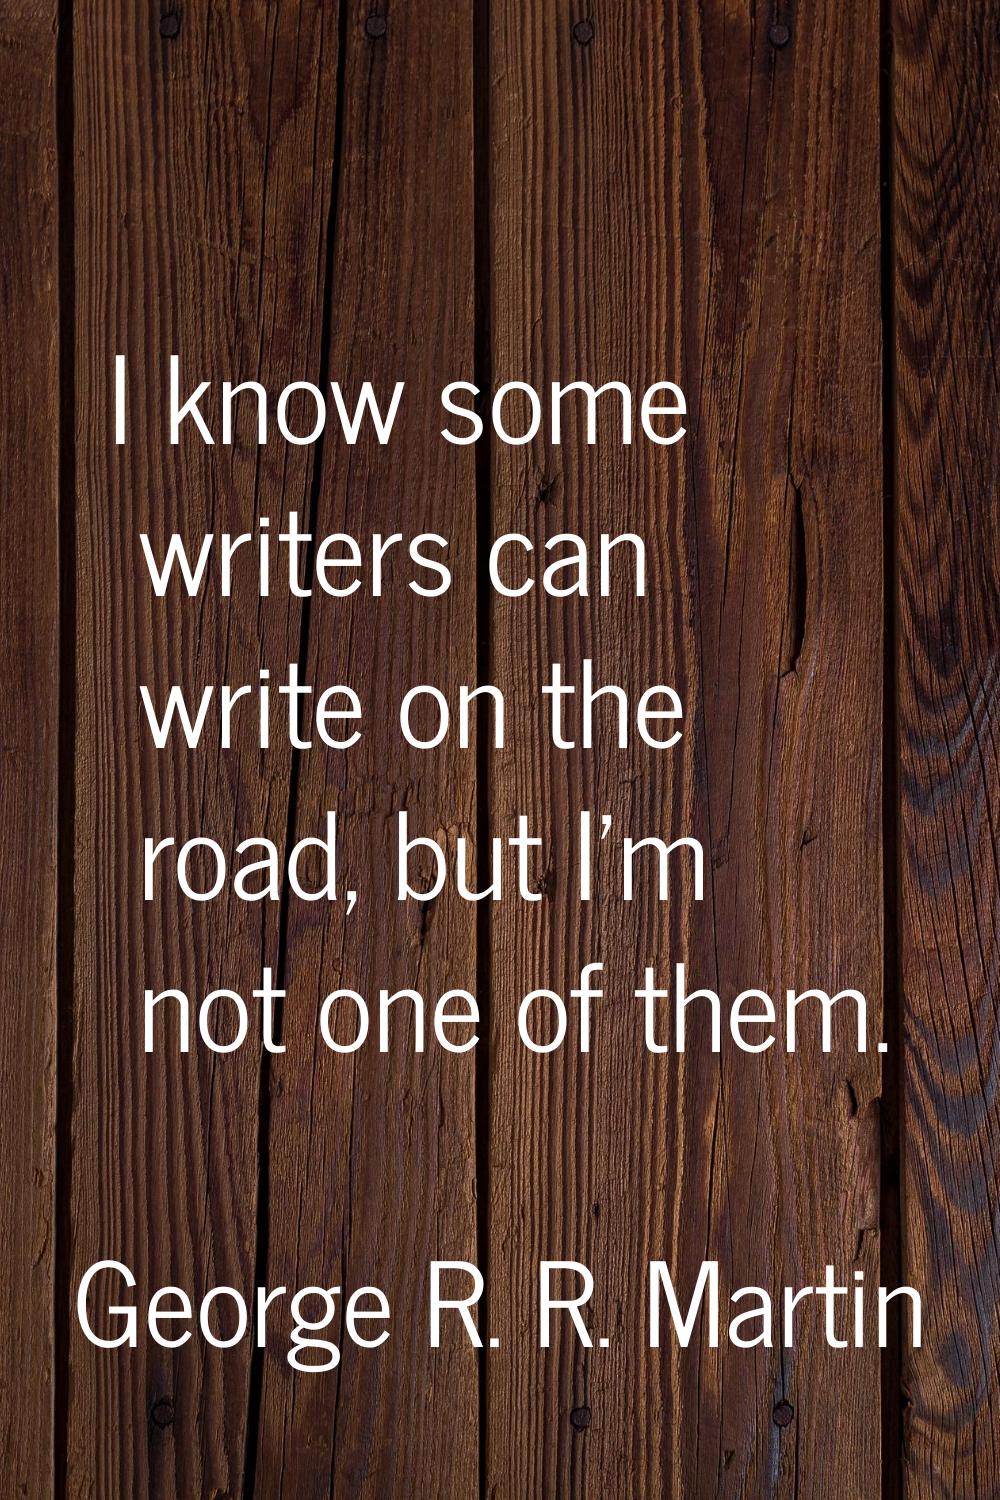 I know some writers can write on the road, but I'm not one of them.